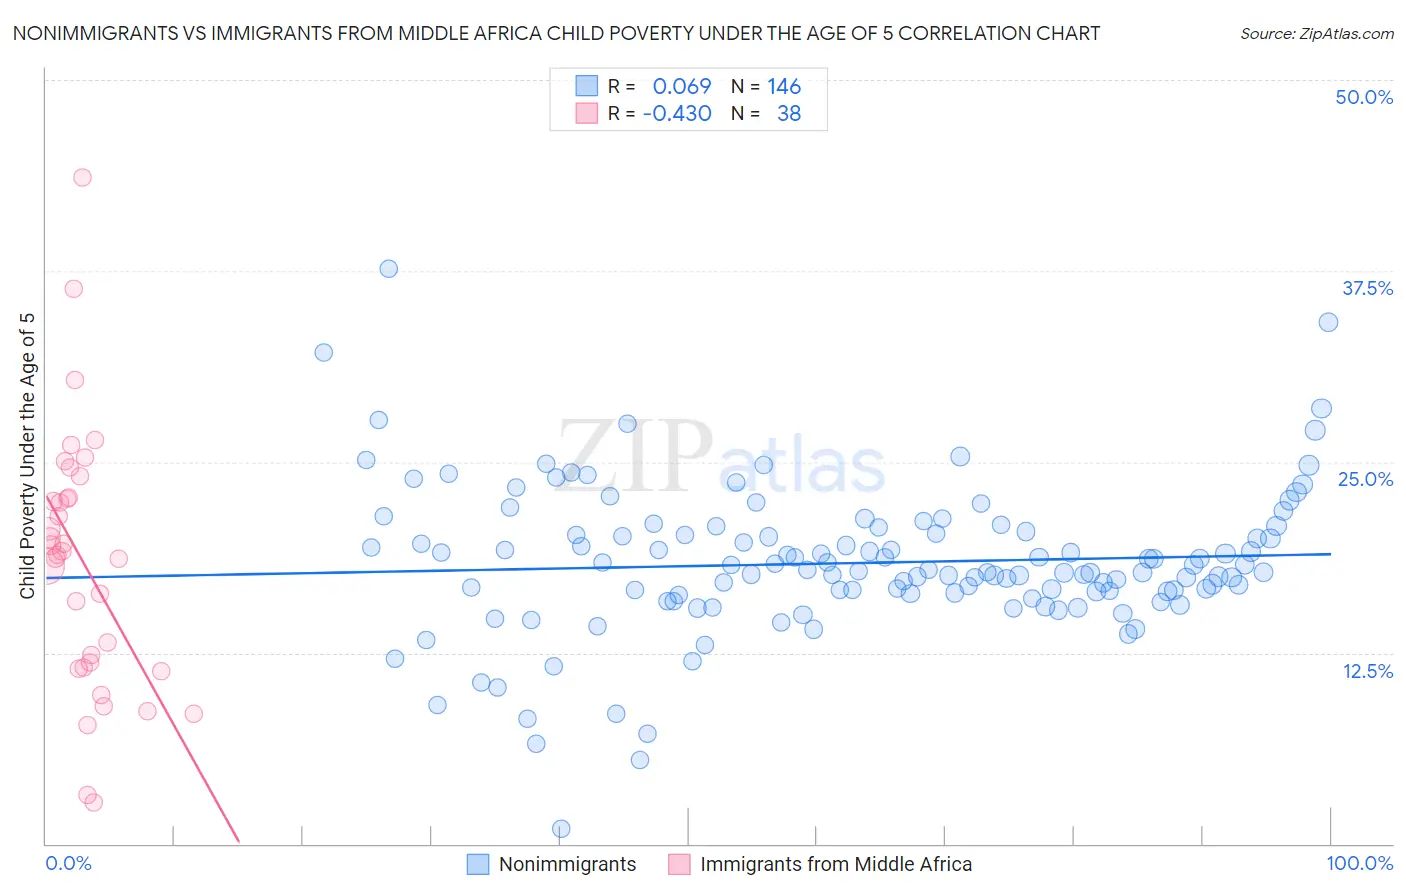 Nonimmigrants vs Immigrants from Middle Africa Child Poverty Under the Age of 5